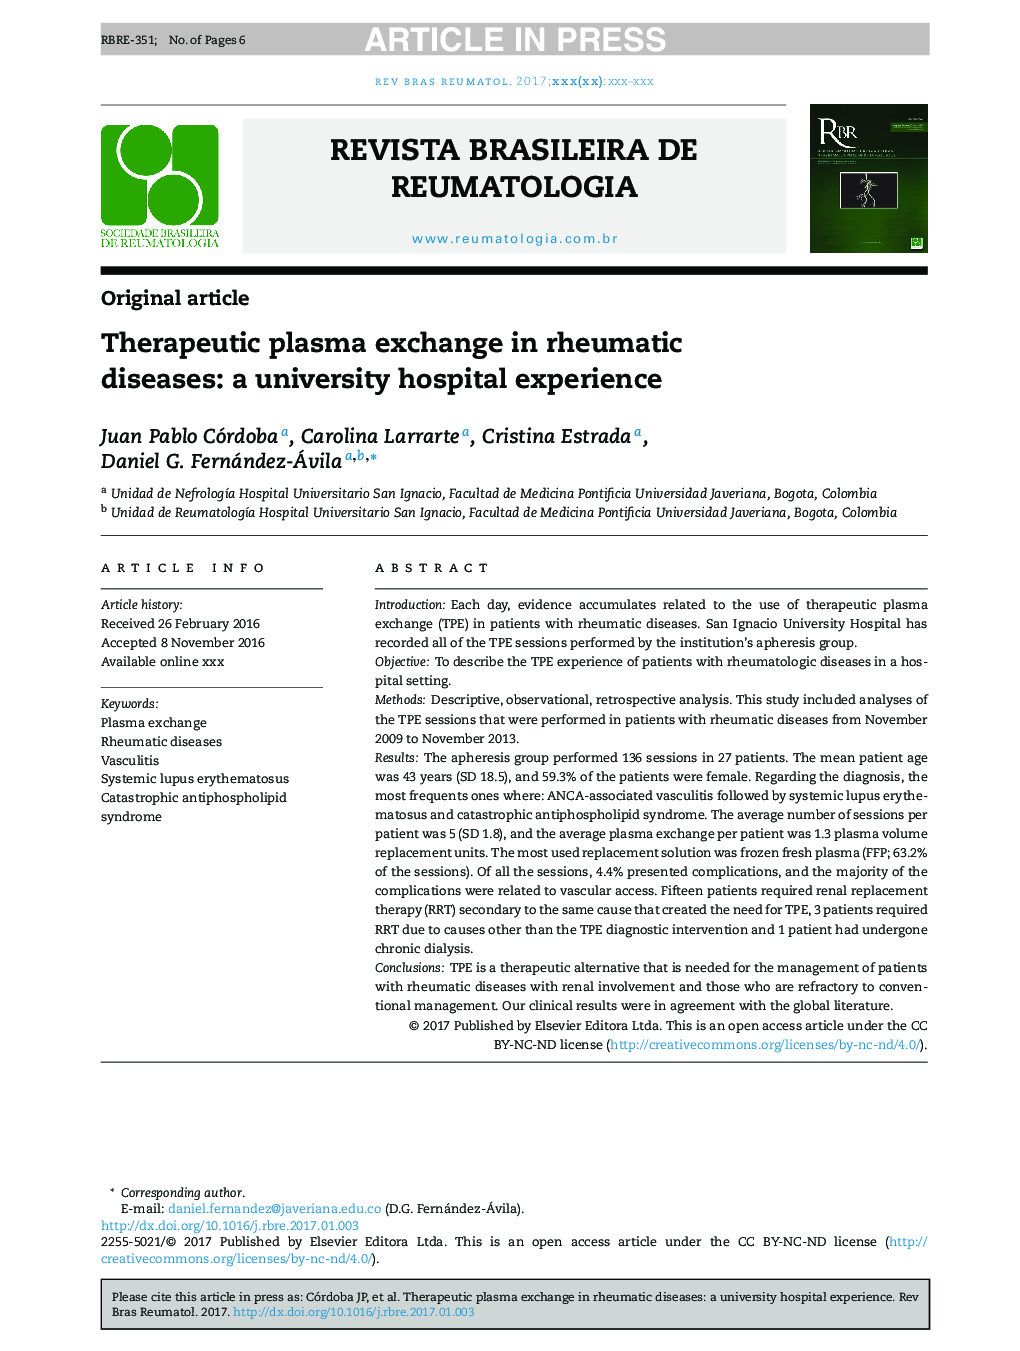 Therapeutic plasma exchange in rheumatic diseases: a university hospital experience